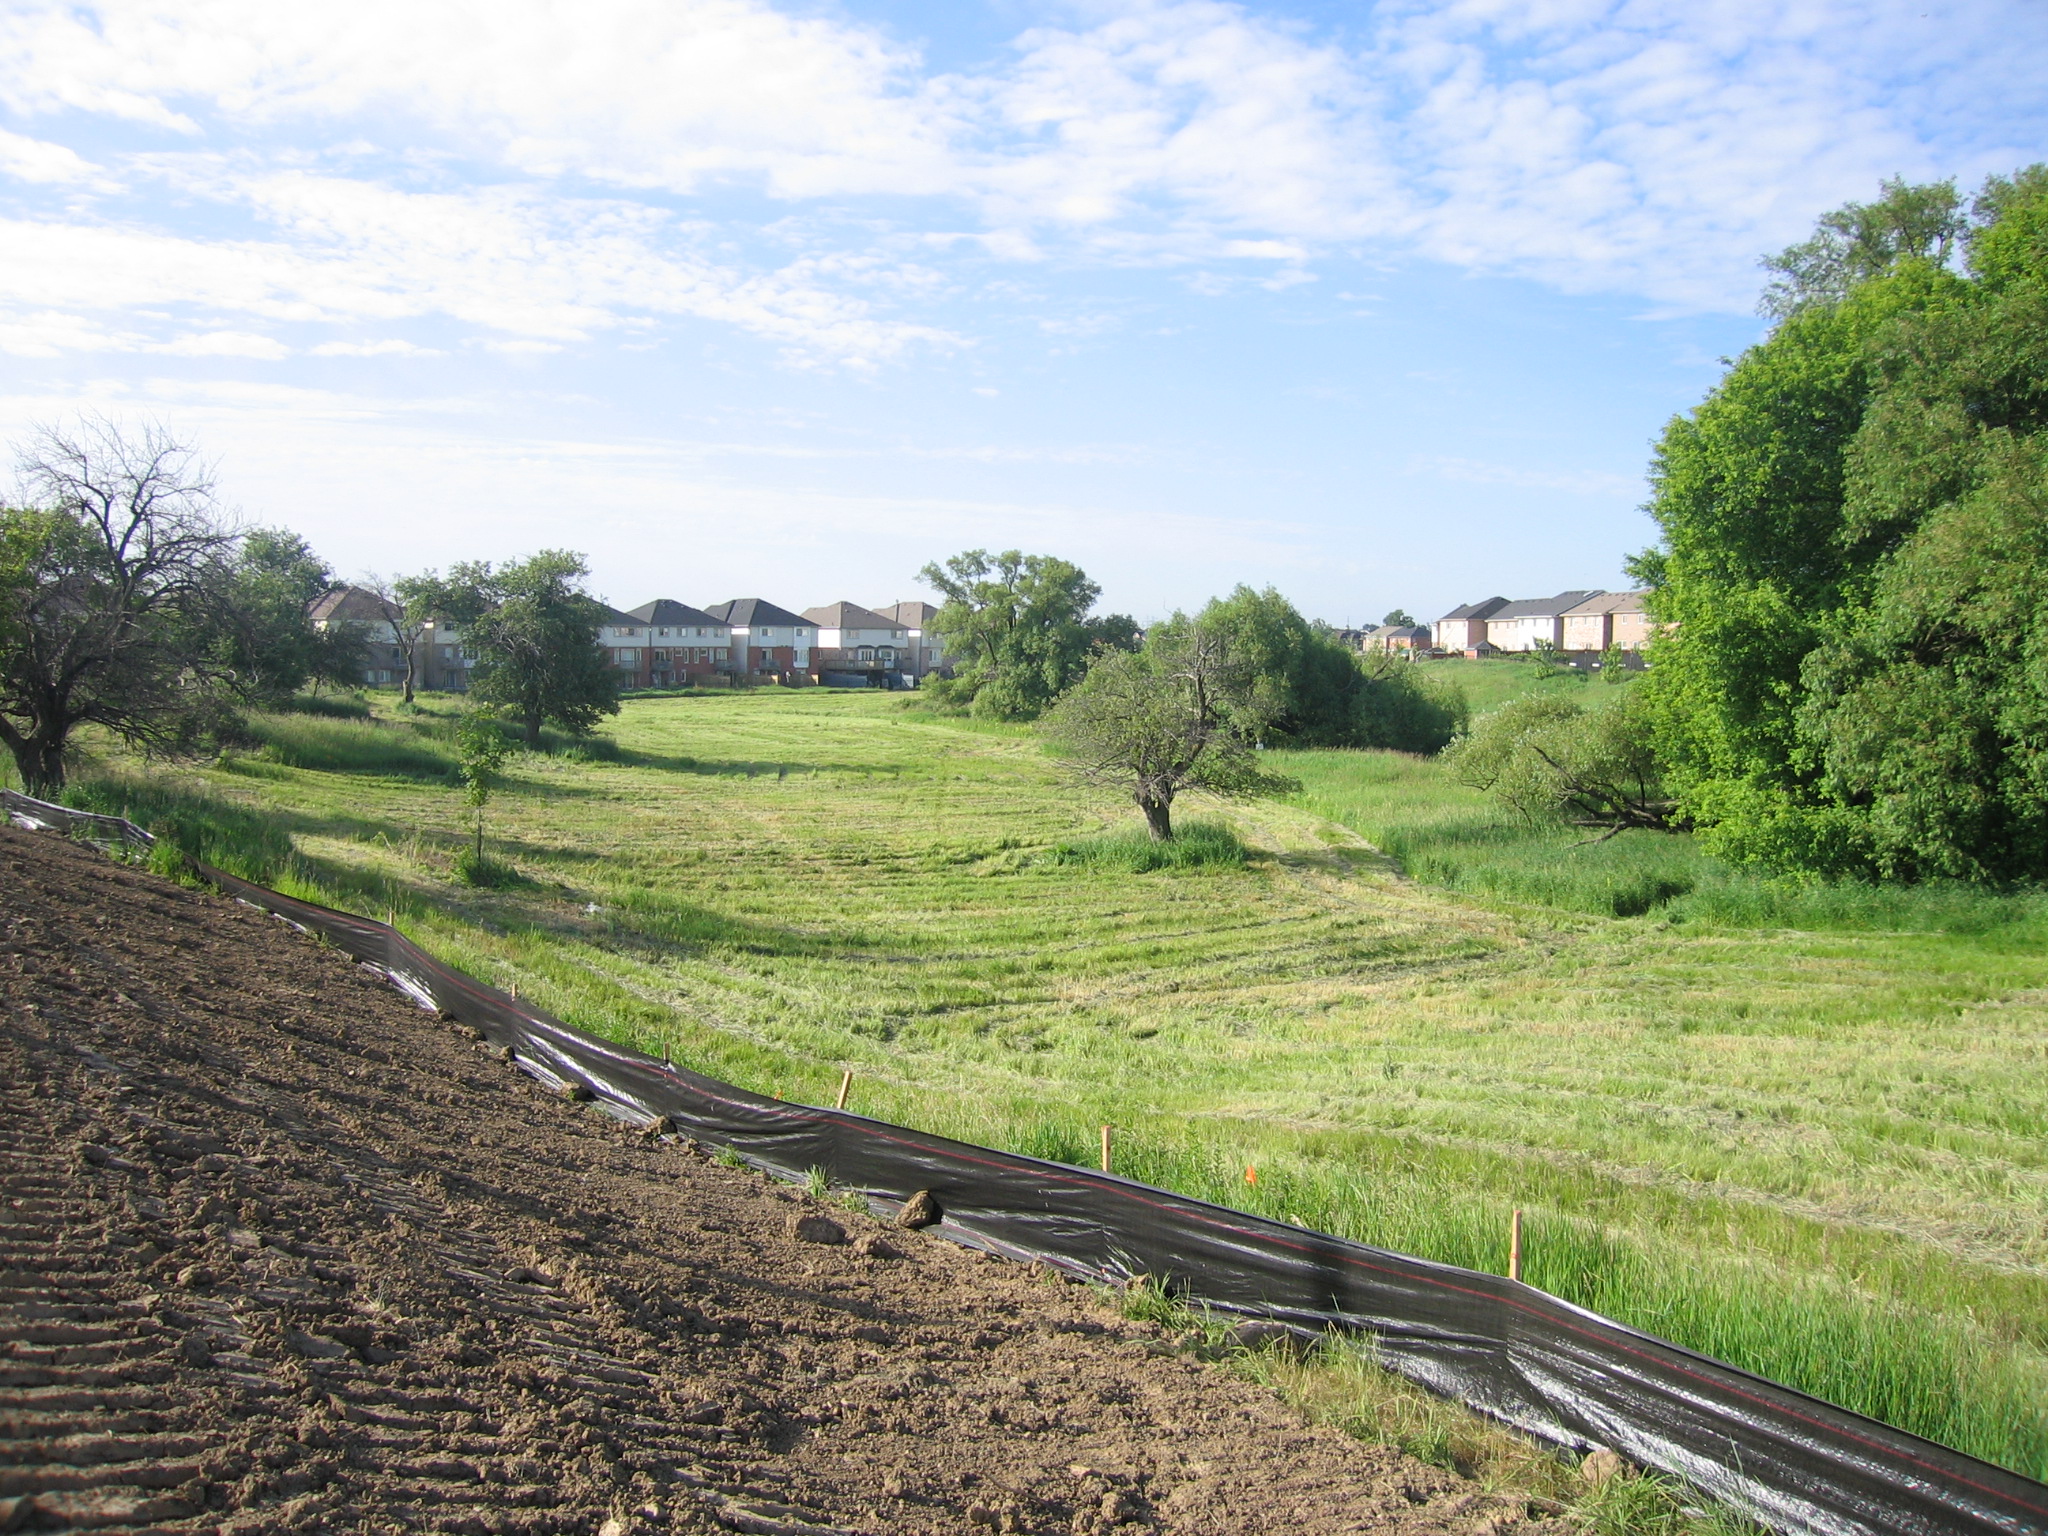 Thackery Valley Before Re-Planting